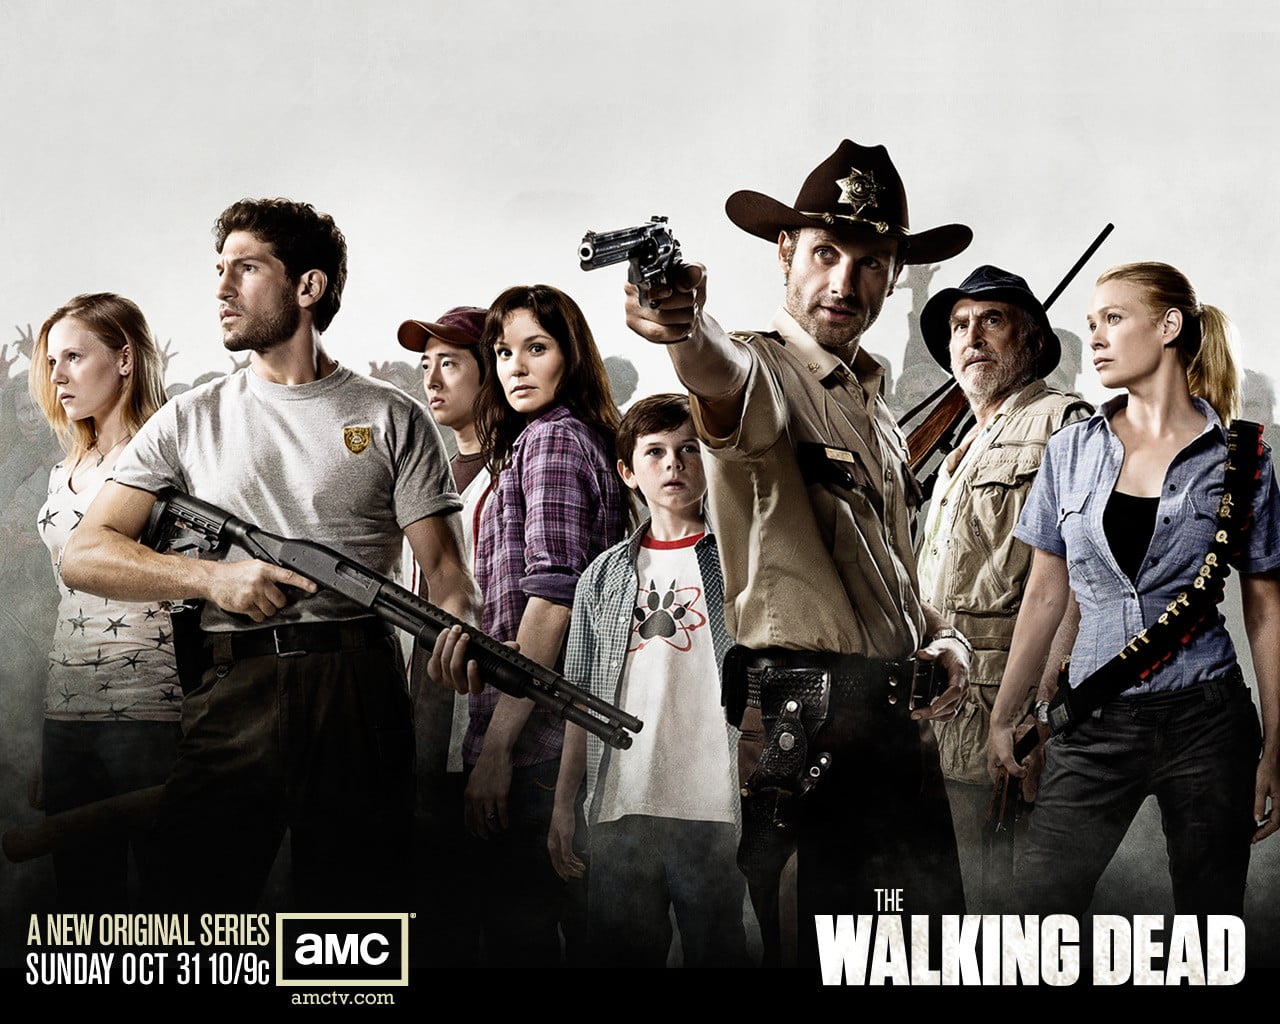 the walking dead wallpaper,movie,poster,photography,album cover,crew